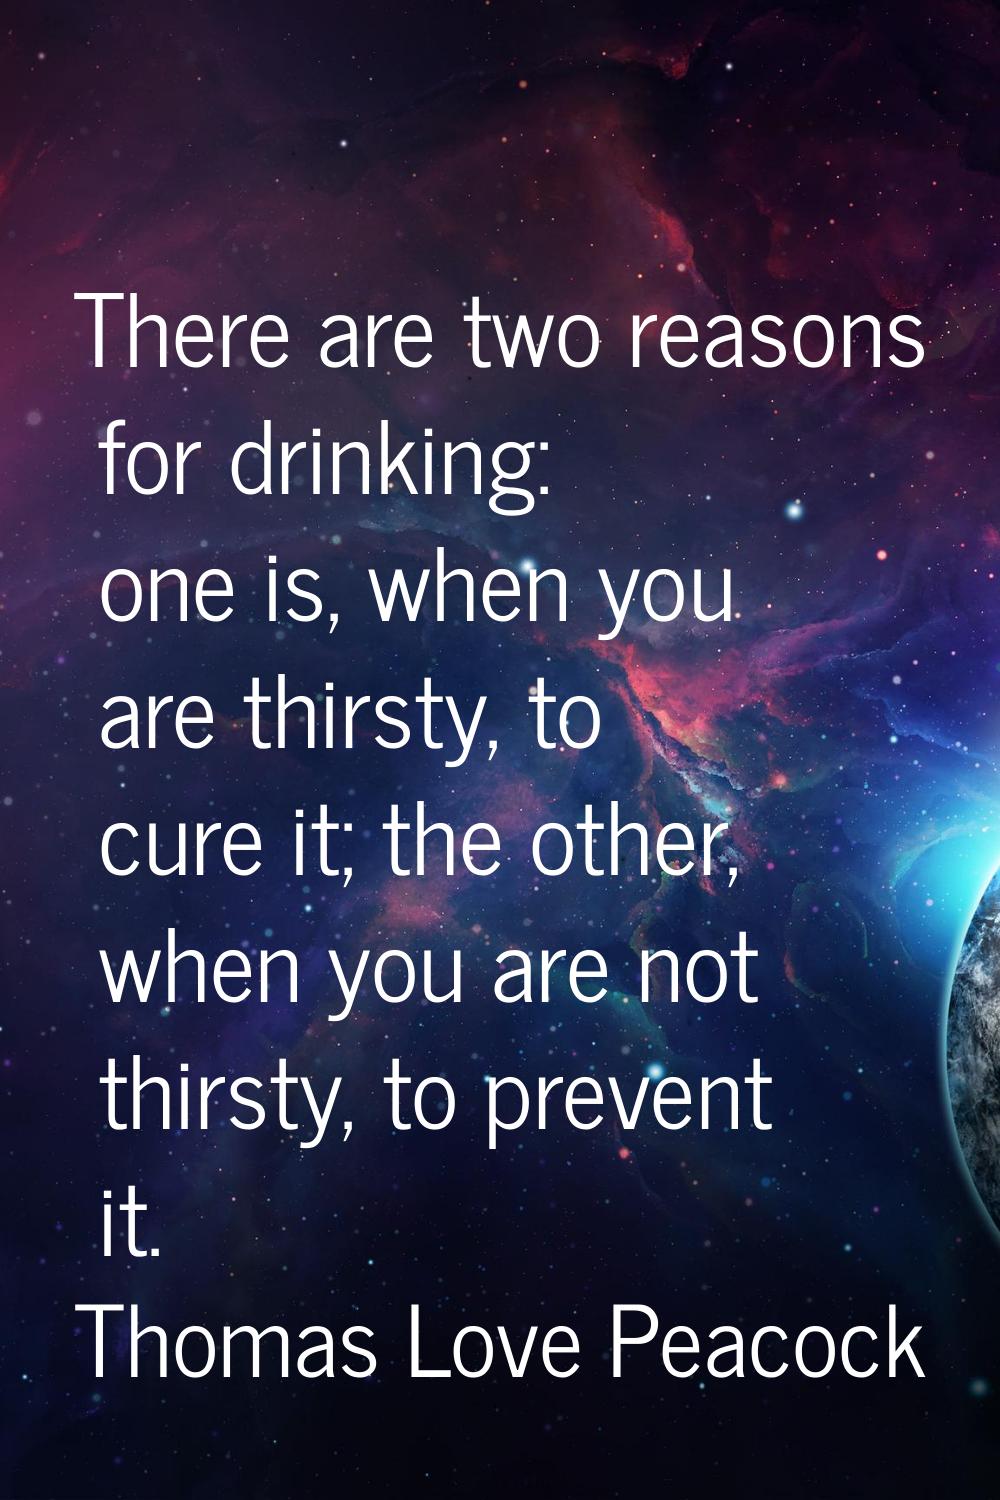 There are two reasons for drinking: one is, when you are thirsty, to cure it; the other, when you a